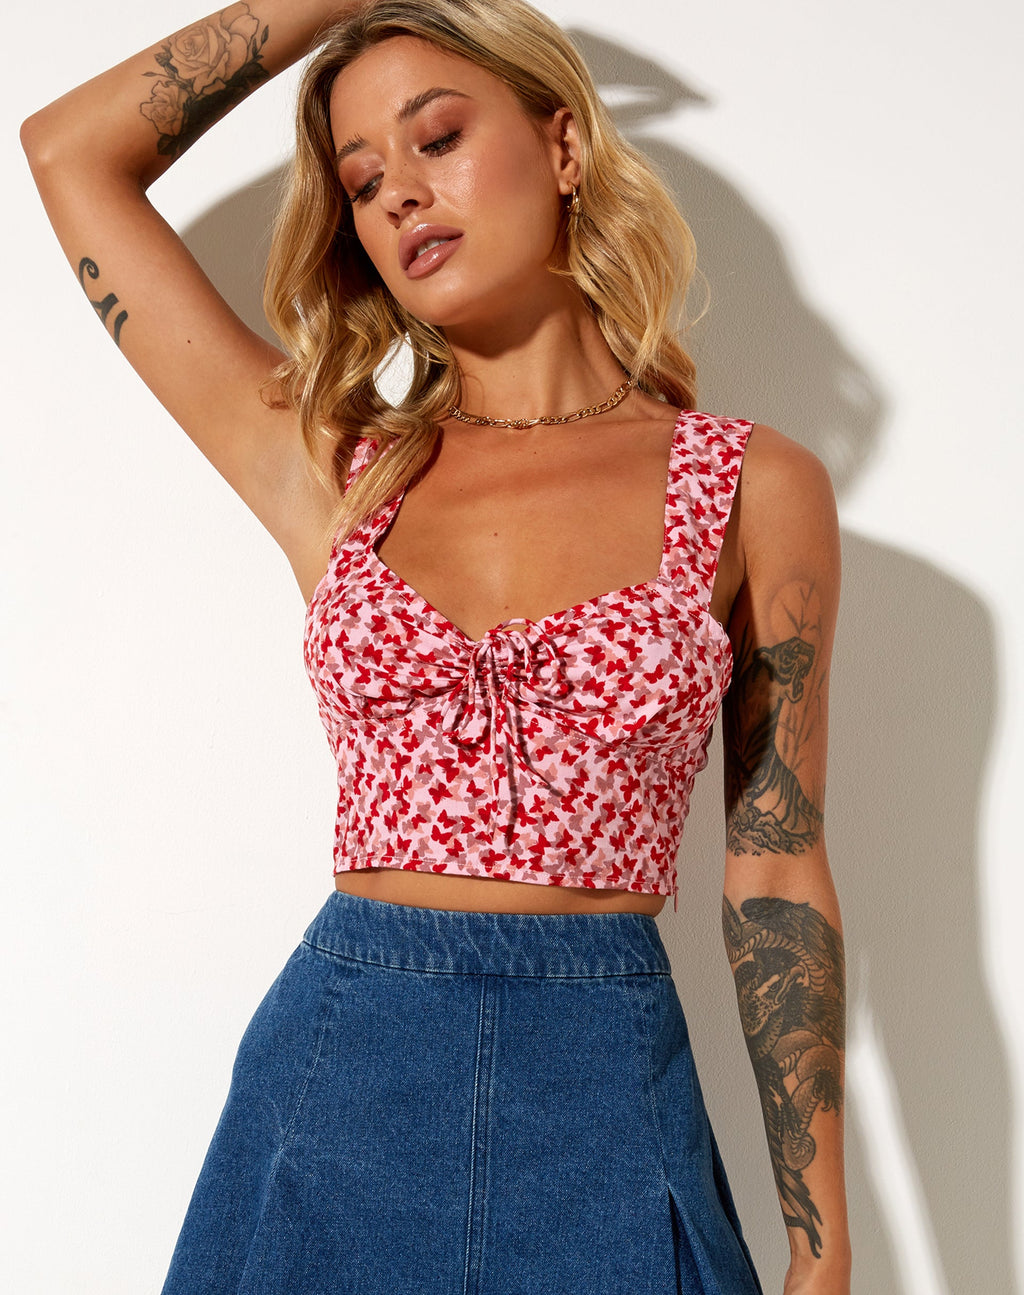 Ridis Vest Crop Top in Ditsy Butterfly Peach and Red